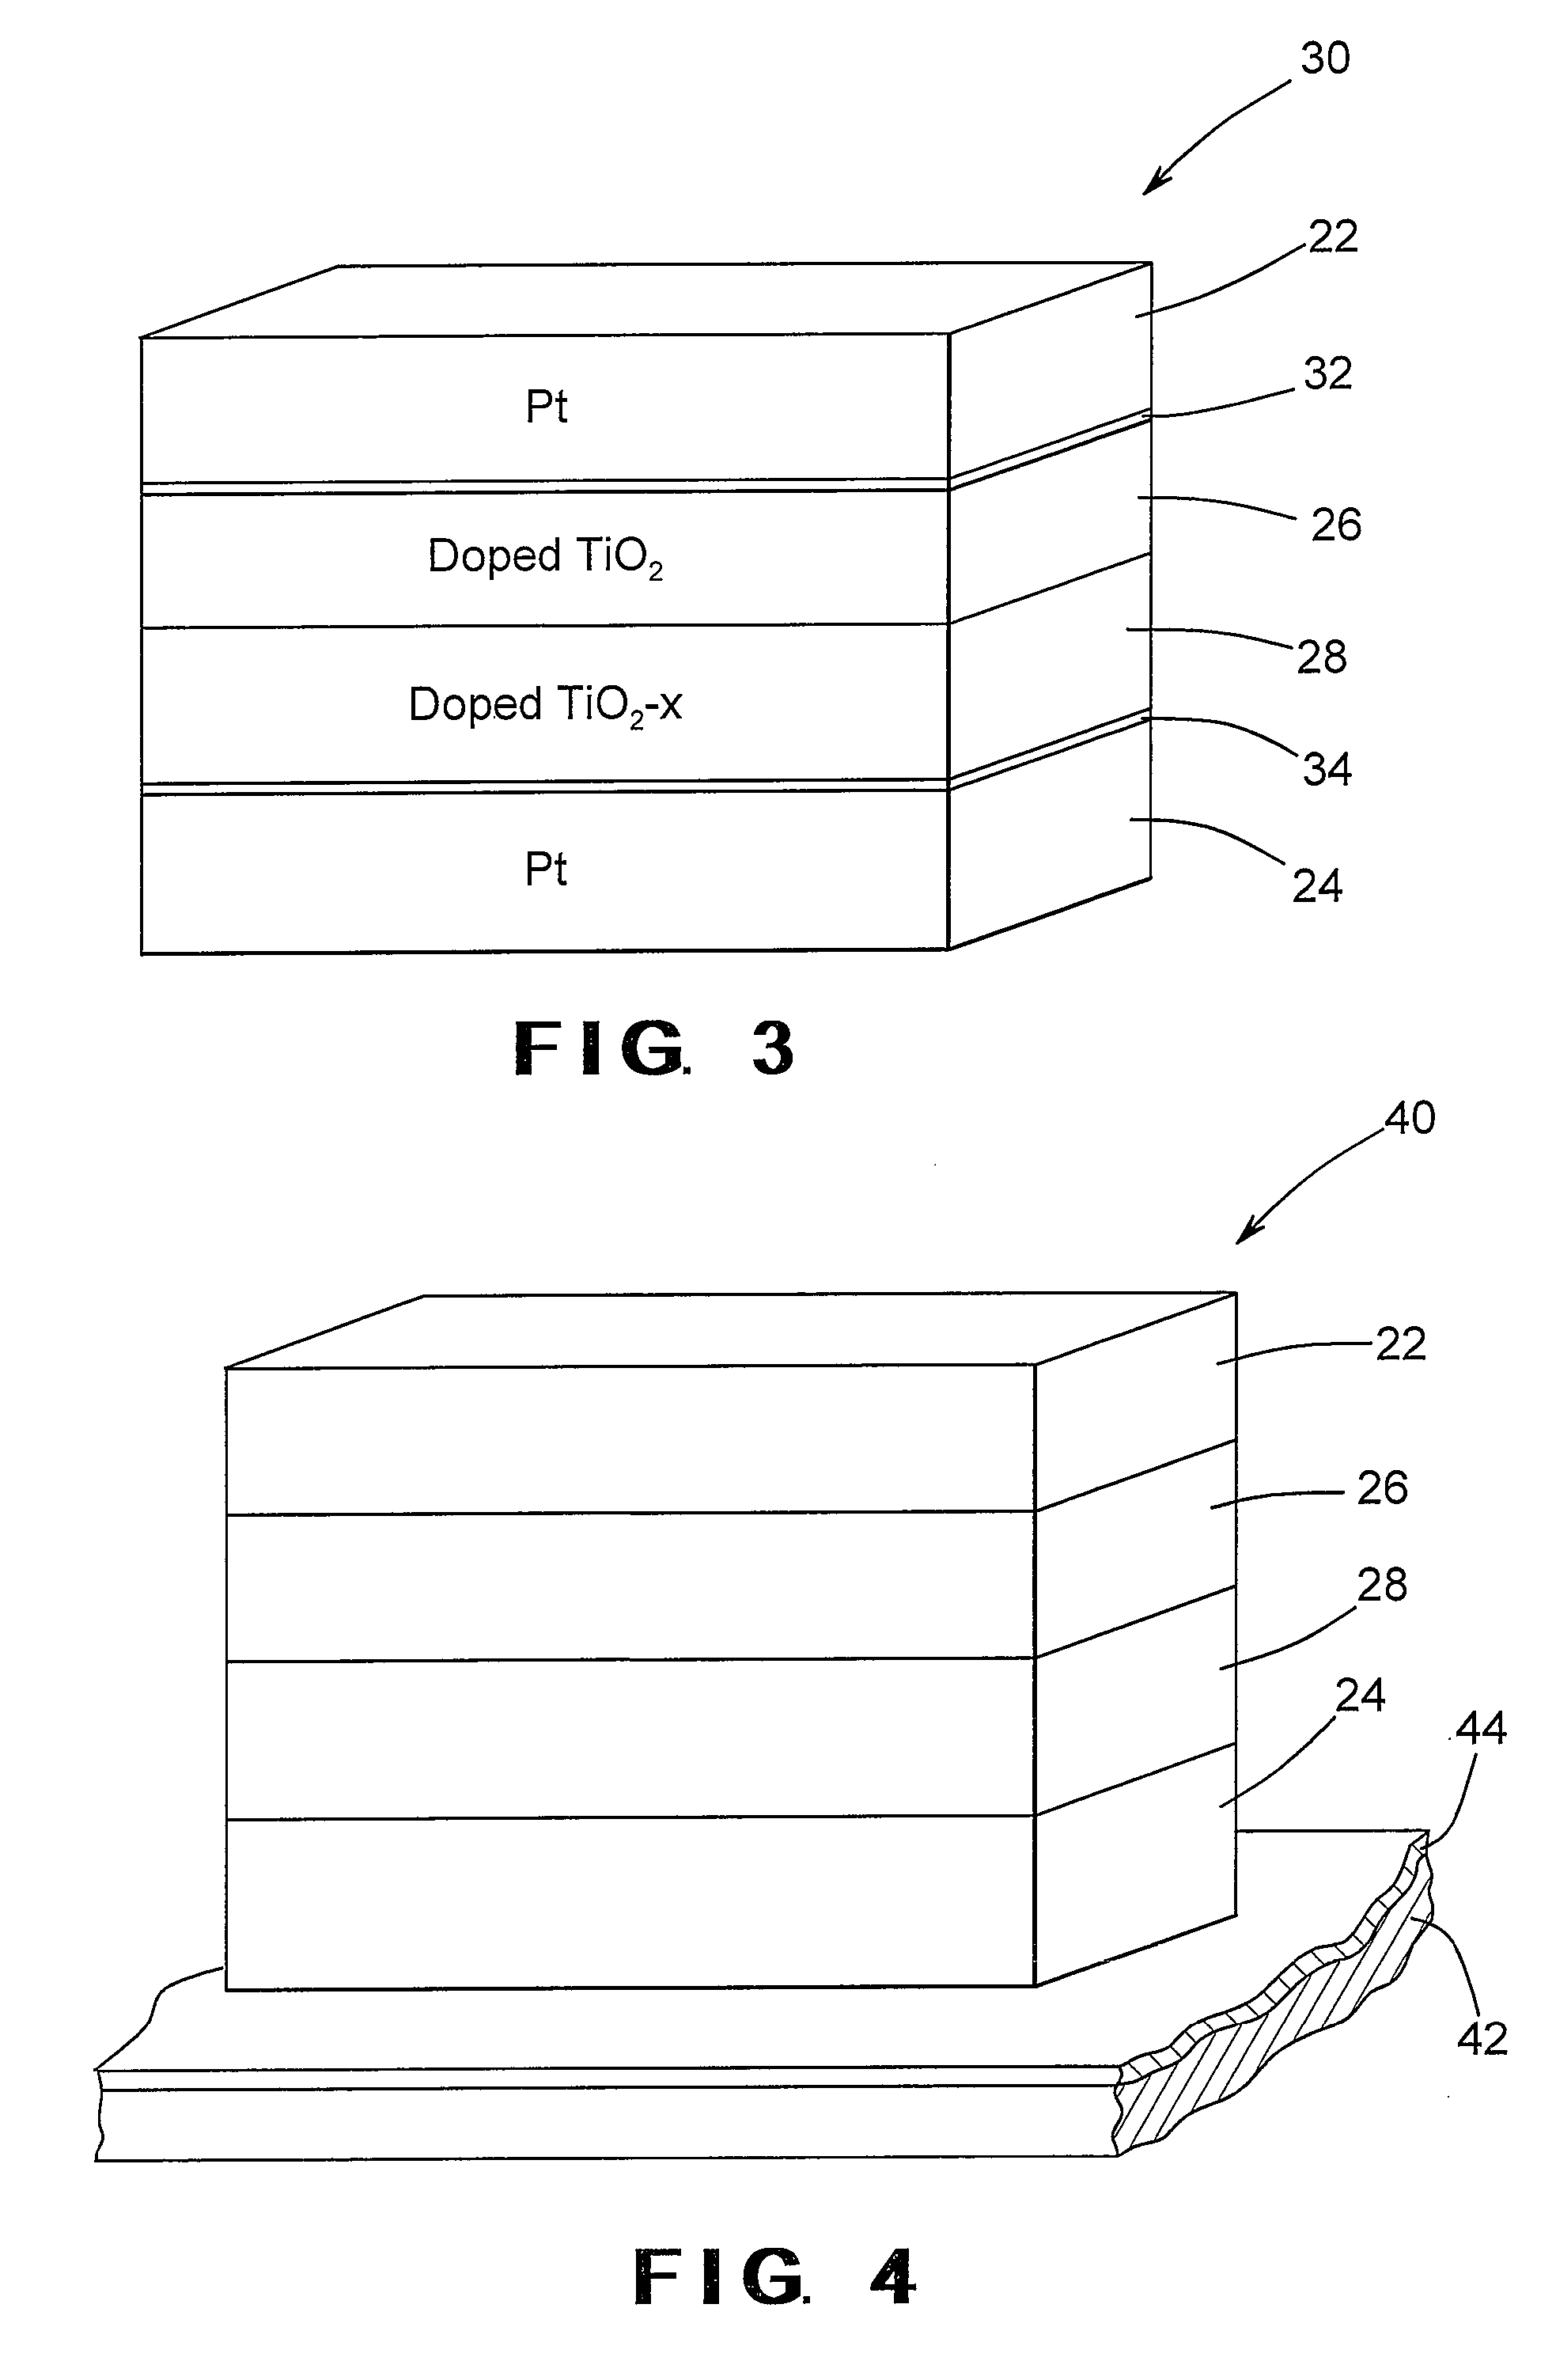 Nanoelectric memristor device with dilute magnetic semiconductors